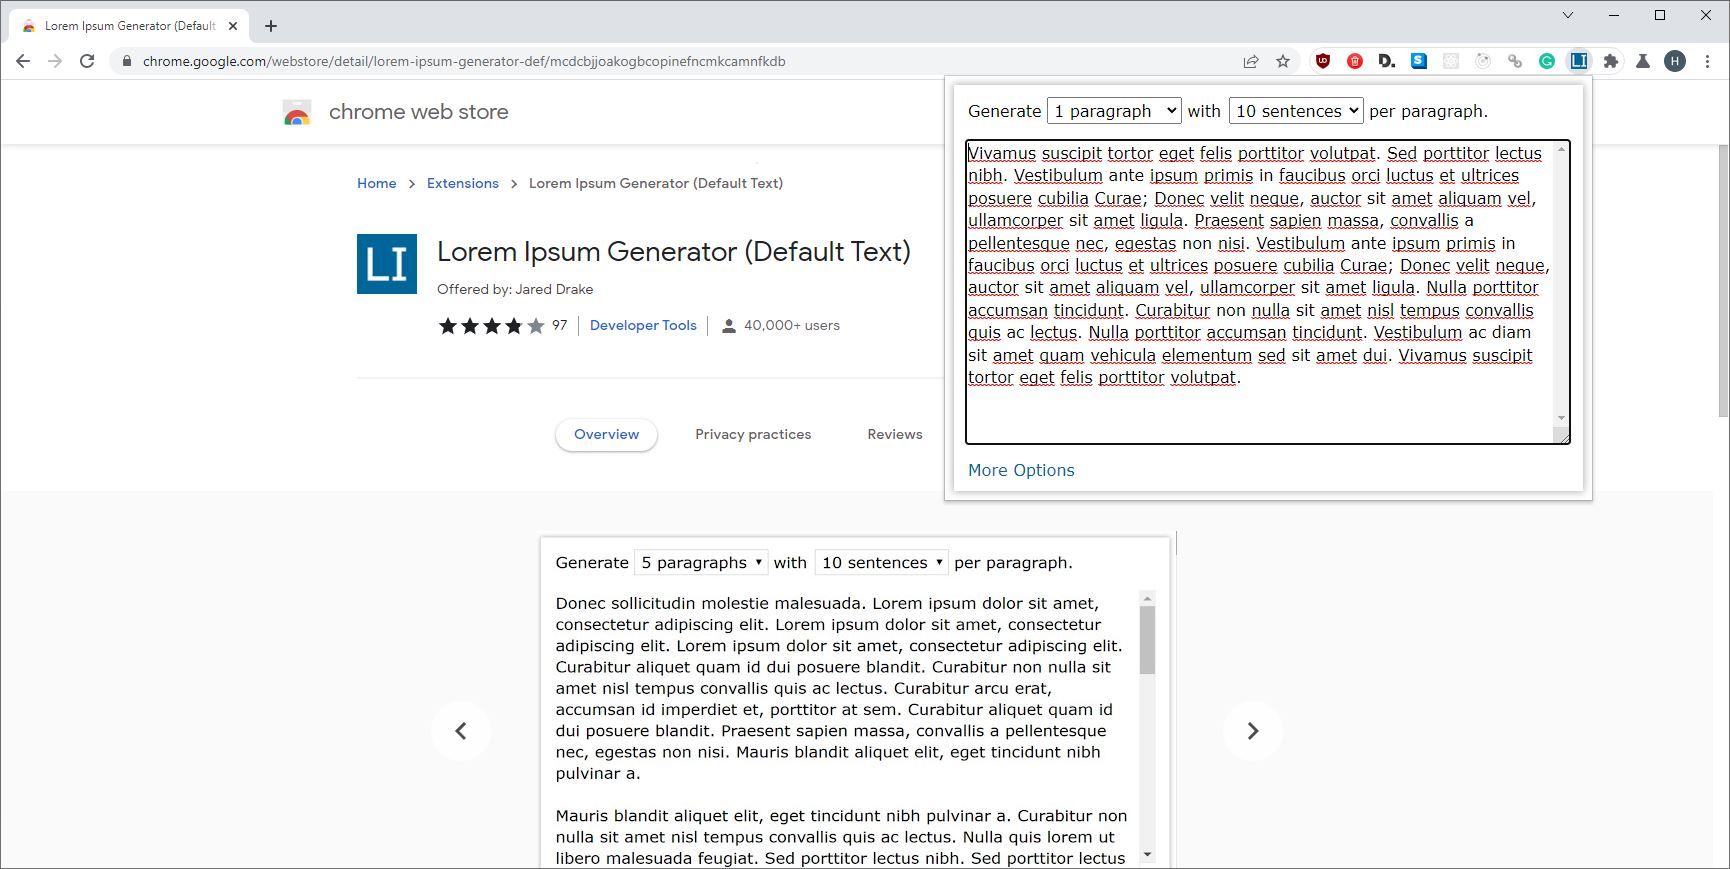 A Screenshot of the Lorem Ipsum Generator (Default Text) Extensions in Use